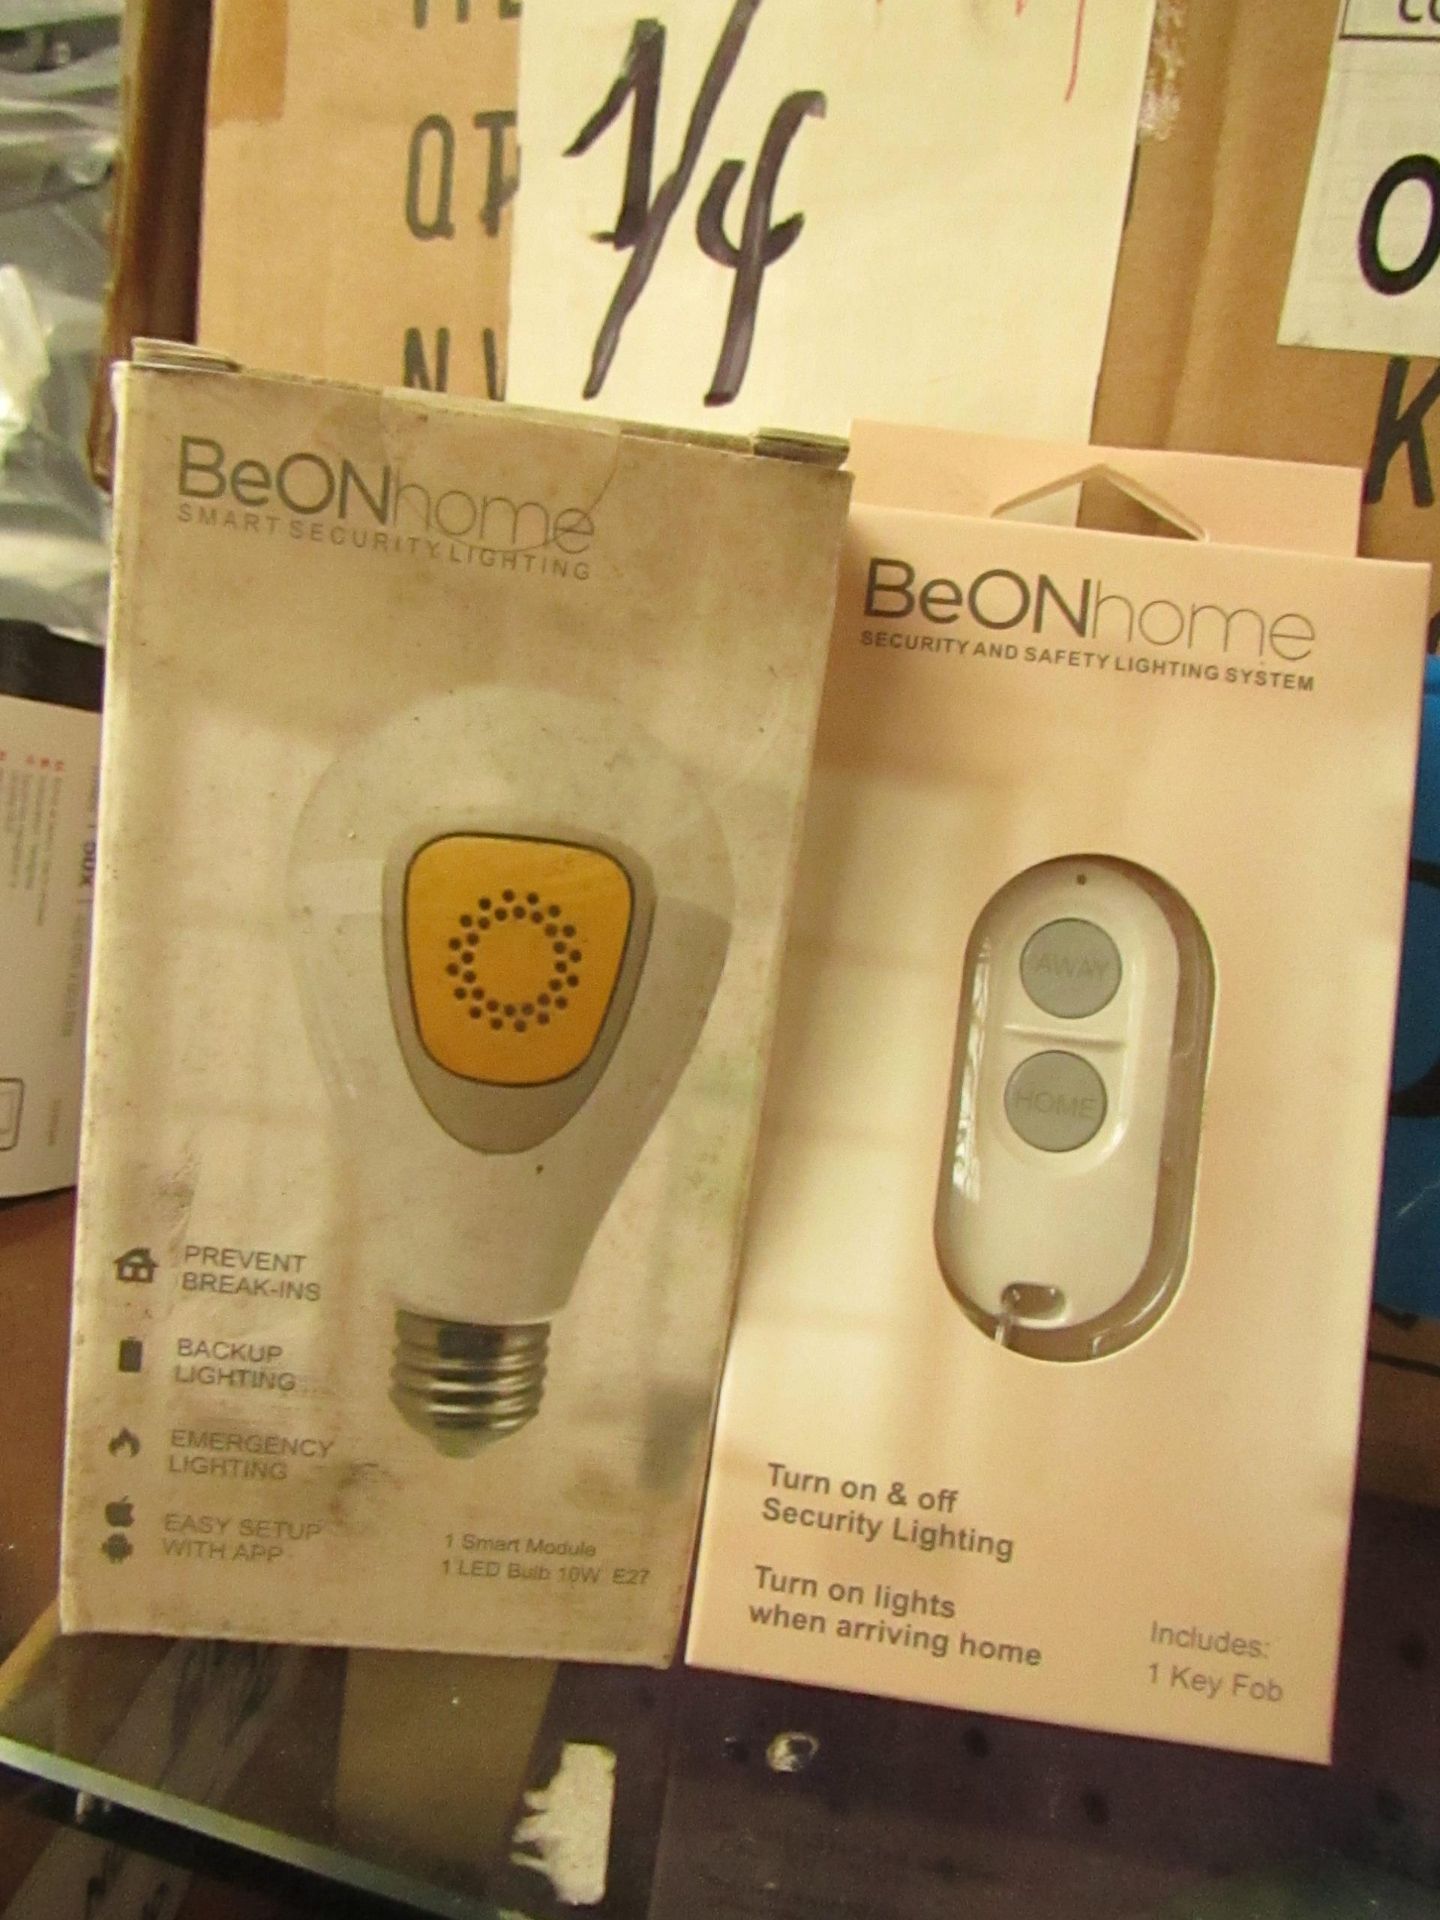 Be on Home - Smart Security Light bulb & Be on Home Remote - LED 10W Bulb - New & Boxed